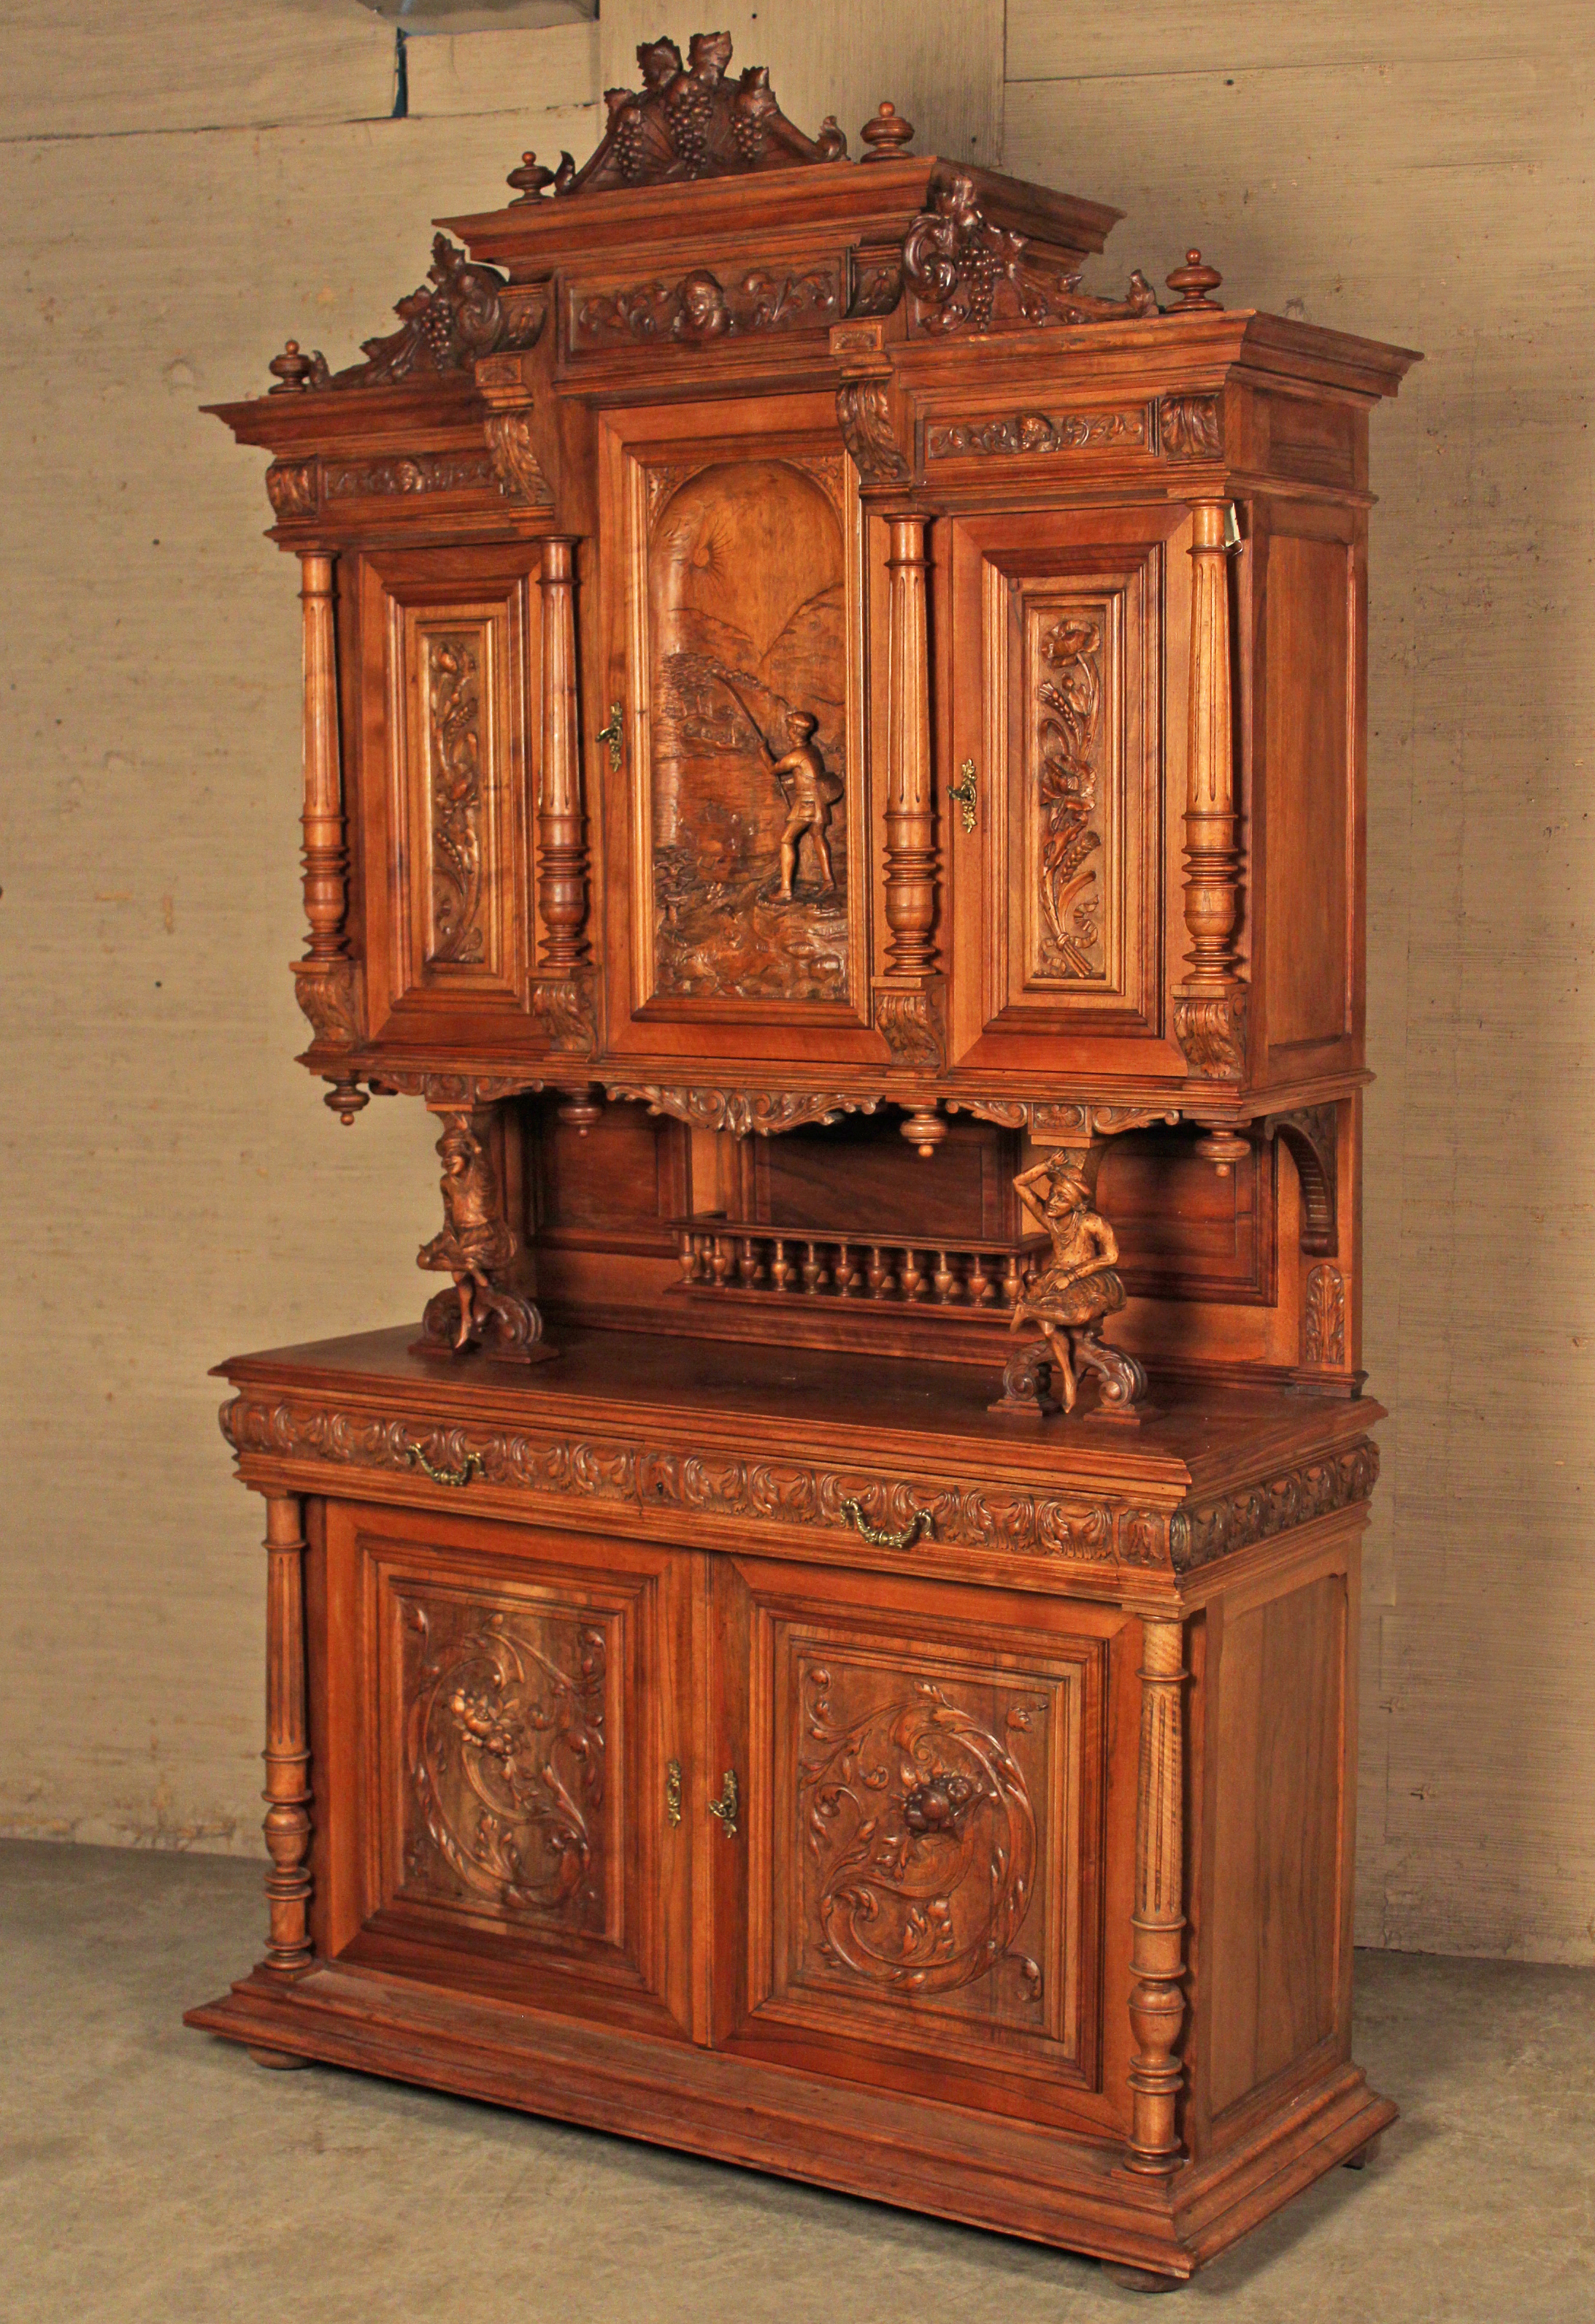 IMPRESSIVE CARVED FRENCH MANNERIST 35f30f